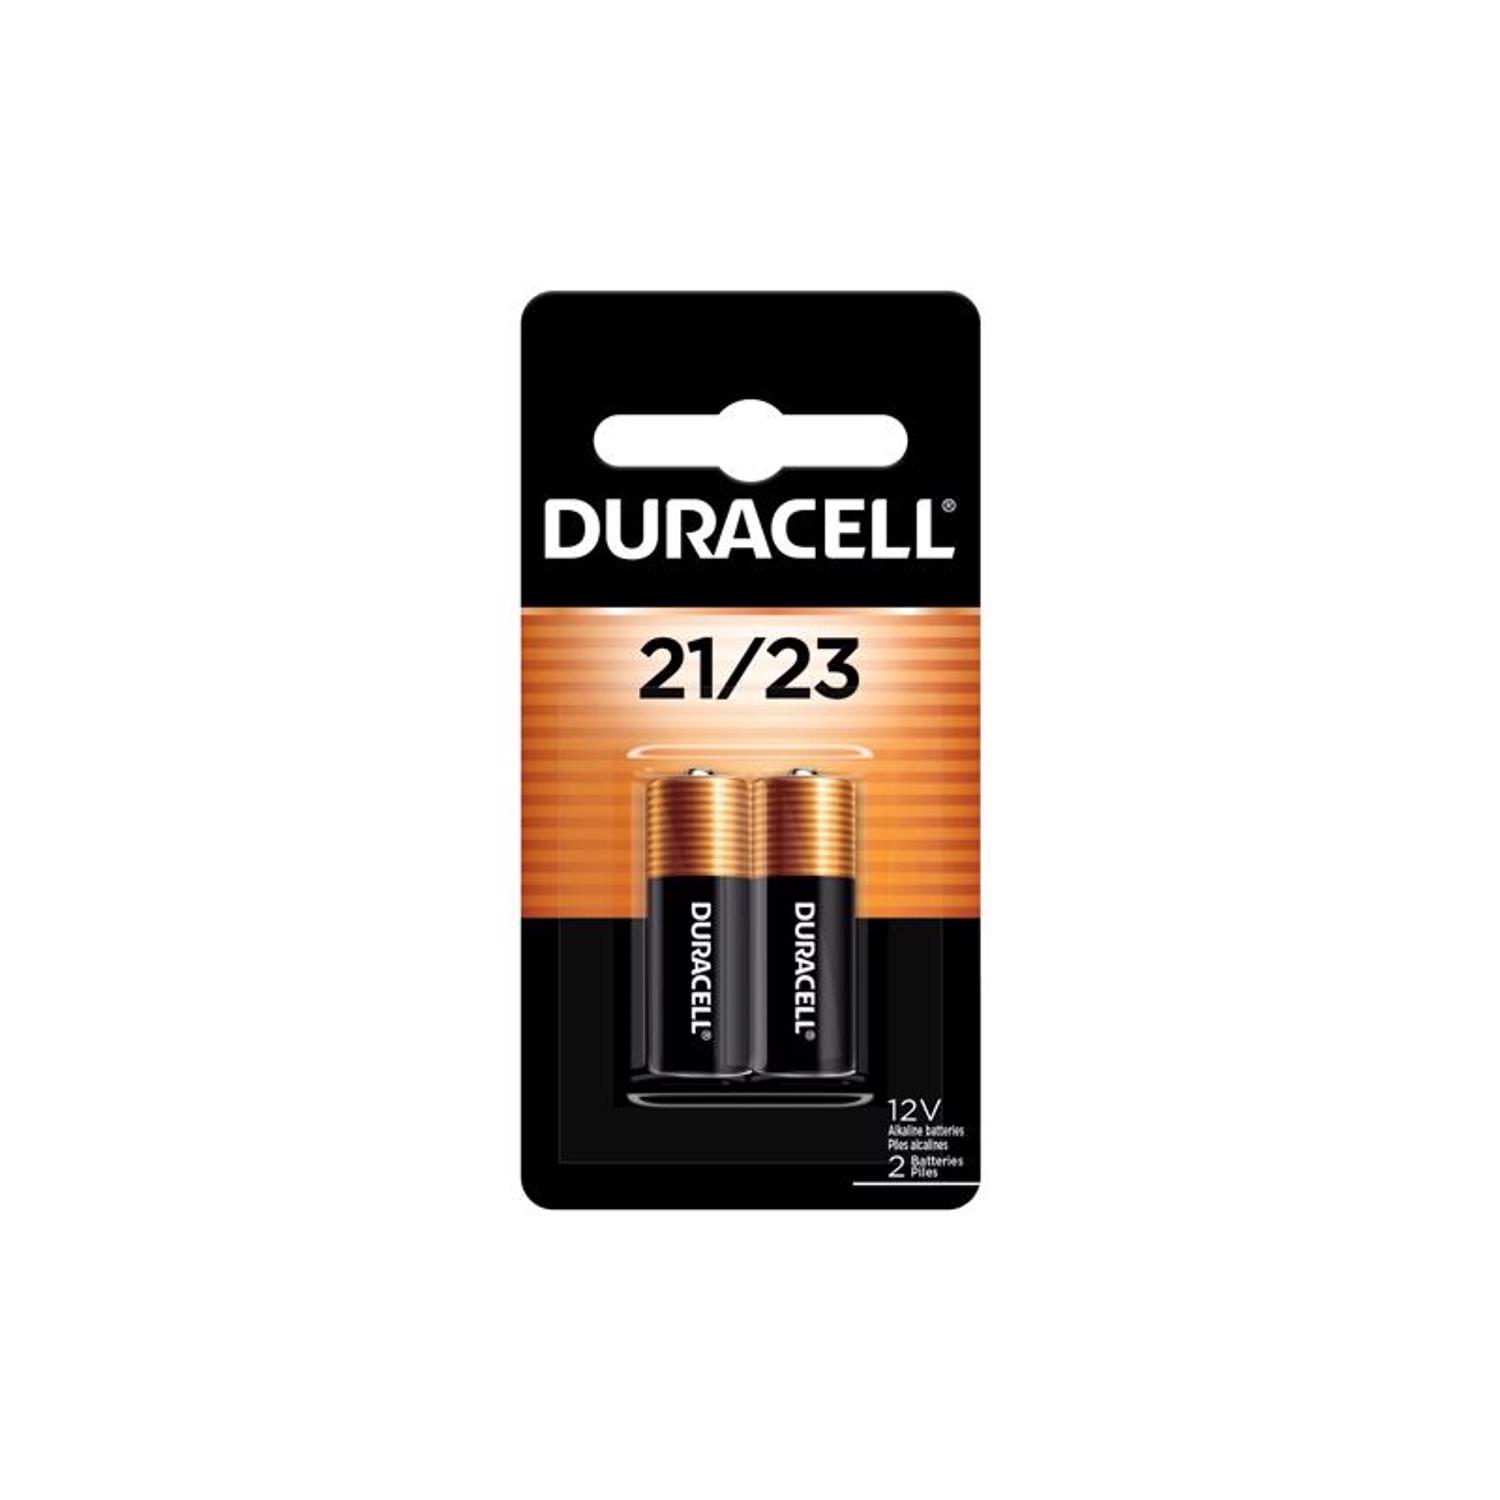 Duracell Recharge Ultra AA 2500 mAh Piles Rechargeable x2 